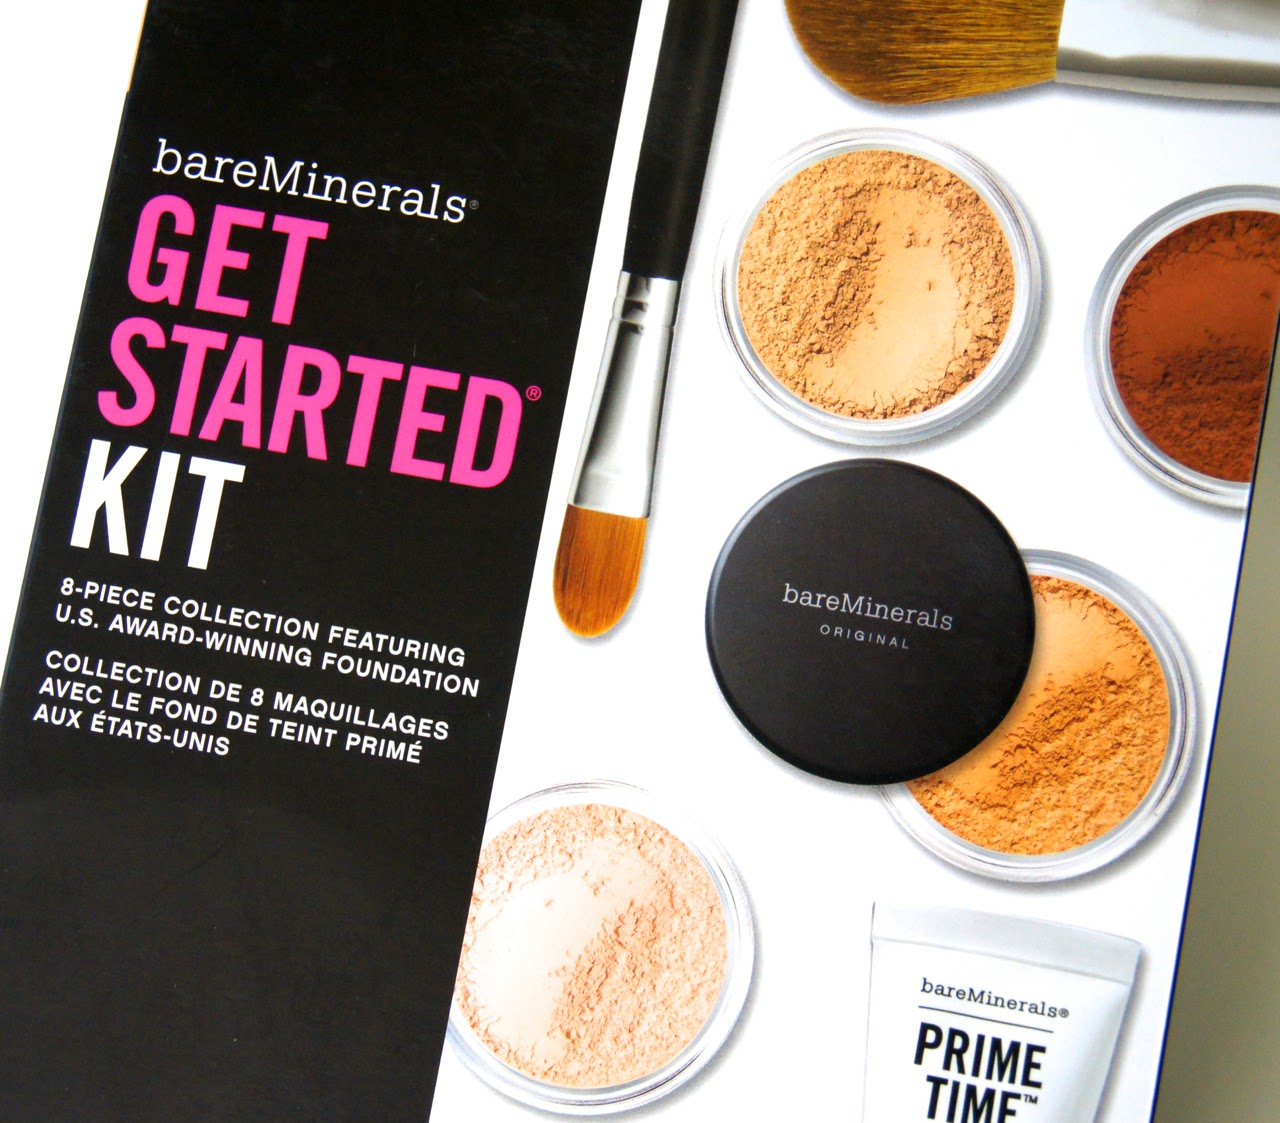 AliceGraceBeauty / Beauty Blog: bareMinerals Get Started Kit + Swatches